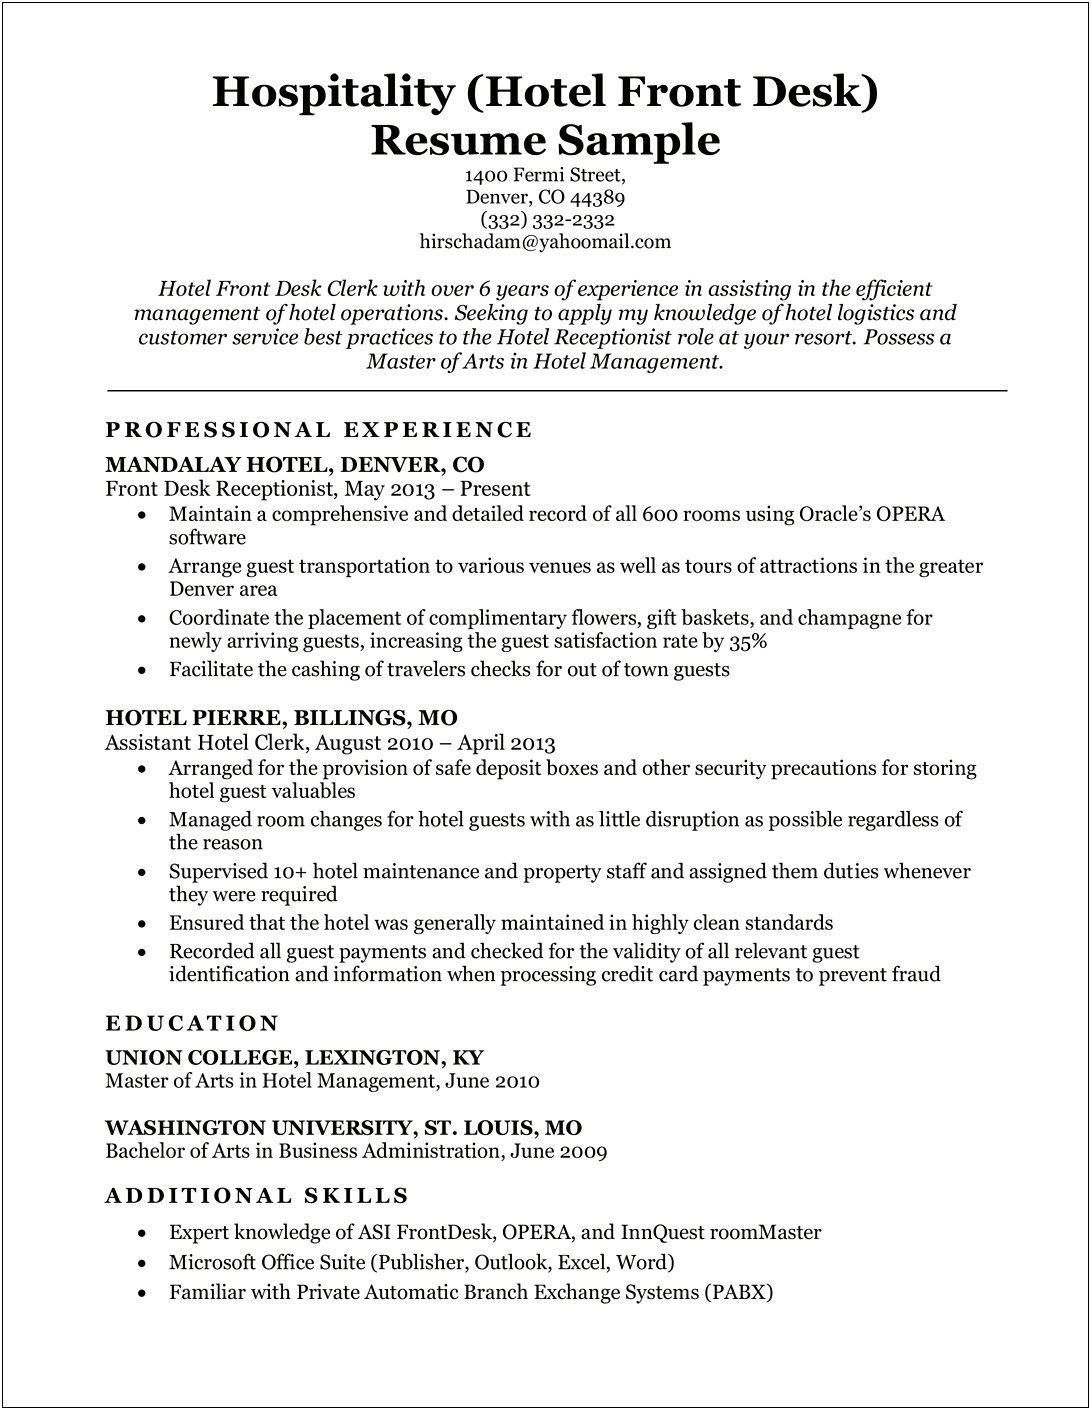 Sample Resumes On Oracle Property Management